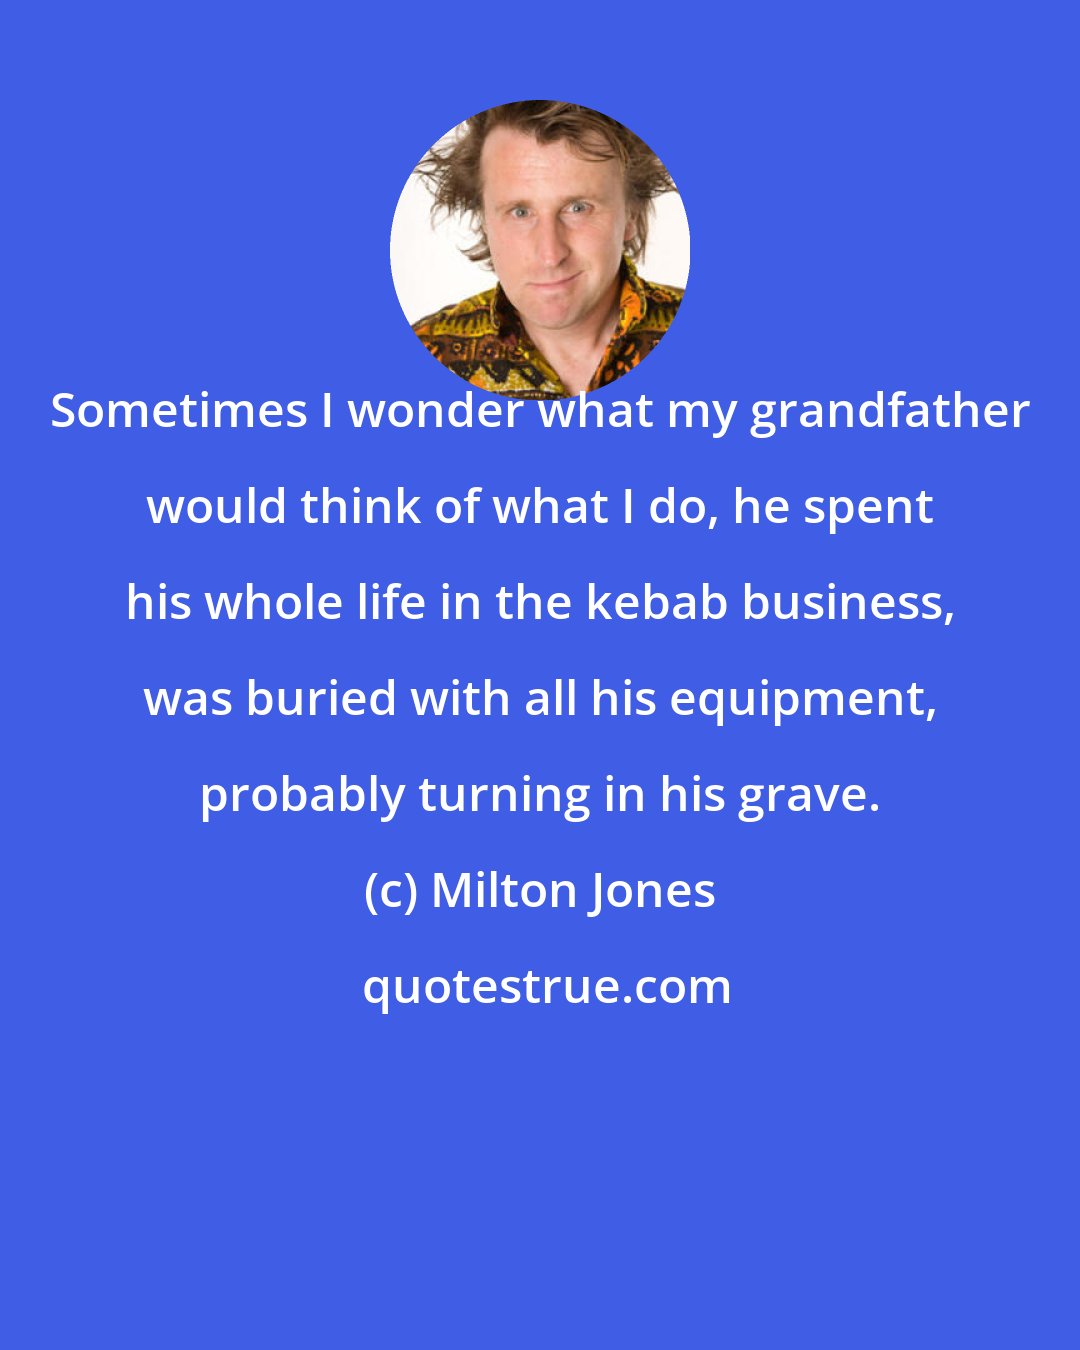 Milton Jones: Sometimes I wonder what my grandfather would think of what I do, he spent his whole life in the kebab business, was buried with all his equipment, probably turning in his grave.